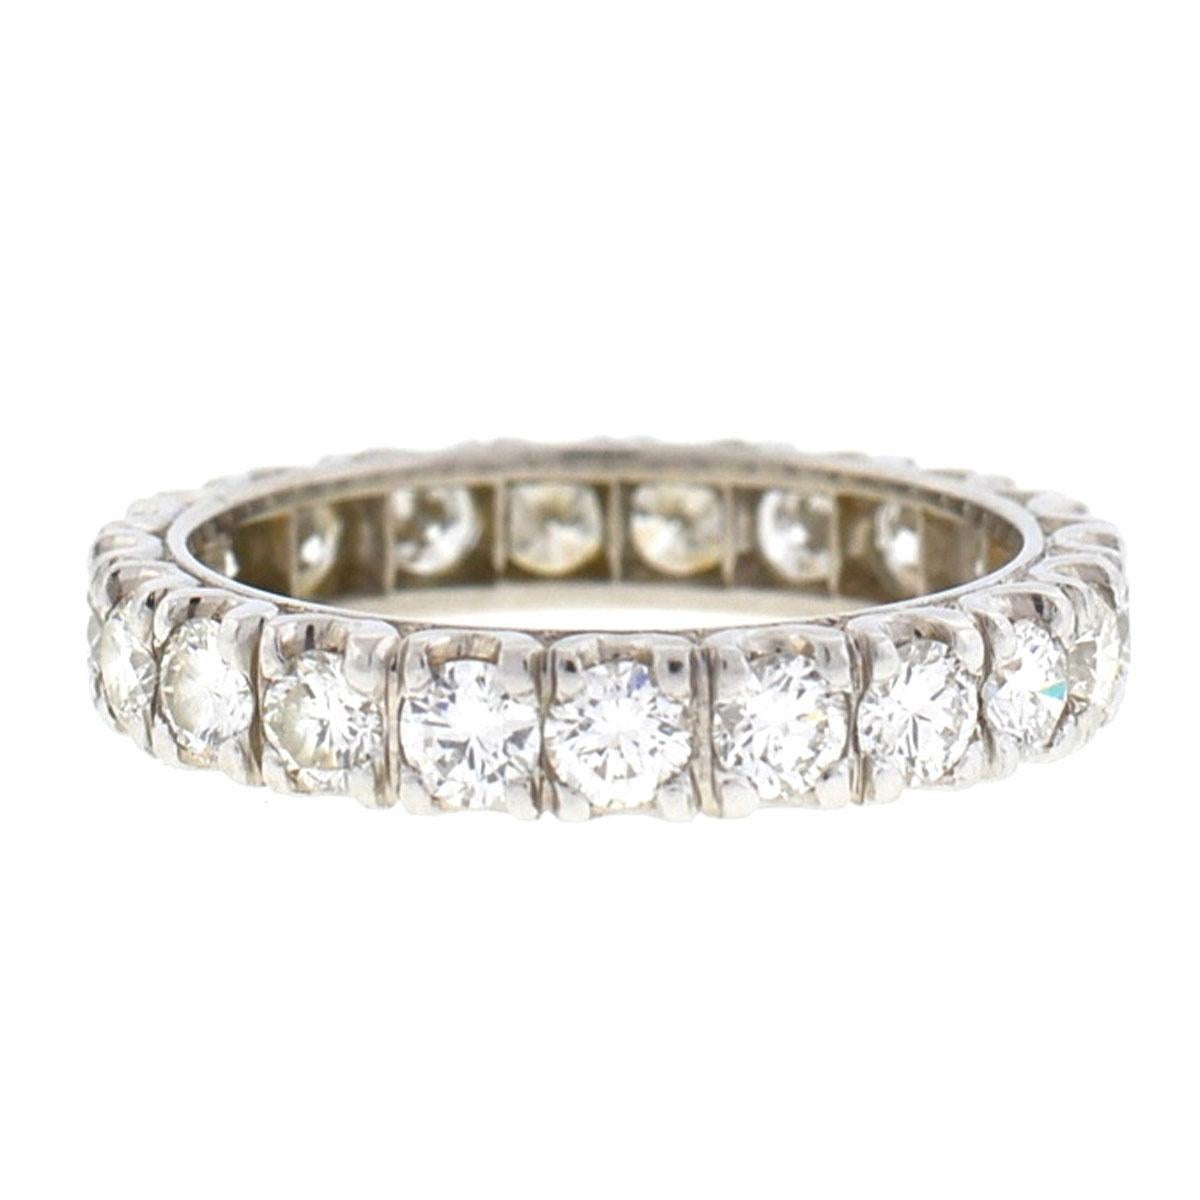 Company-N/A
Style-Diamond Eternity Band Ring 2.2 Cts 
Metal-Platinum 
Size-8
Weight-5.42 grams
Stones-Diamonds approx 2.2 Cts tw